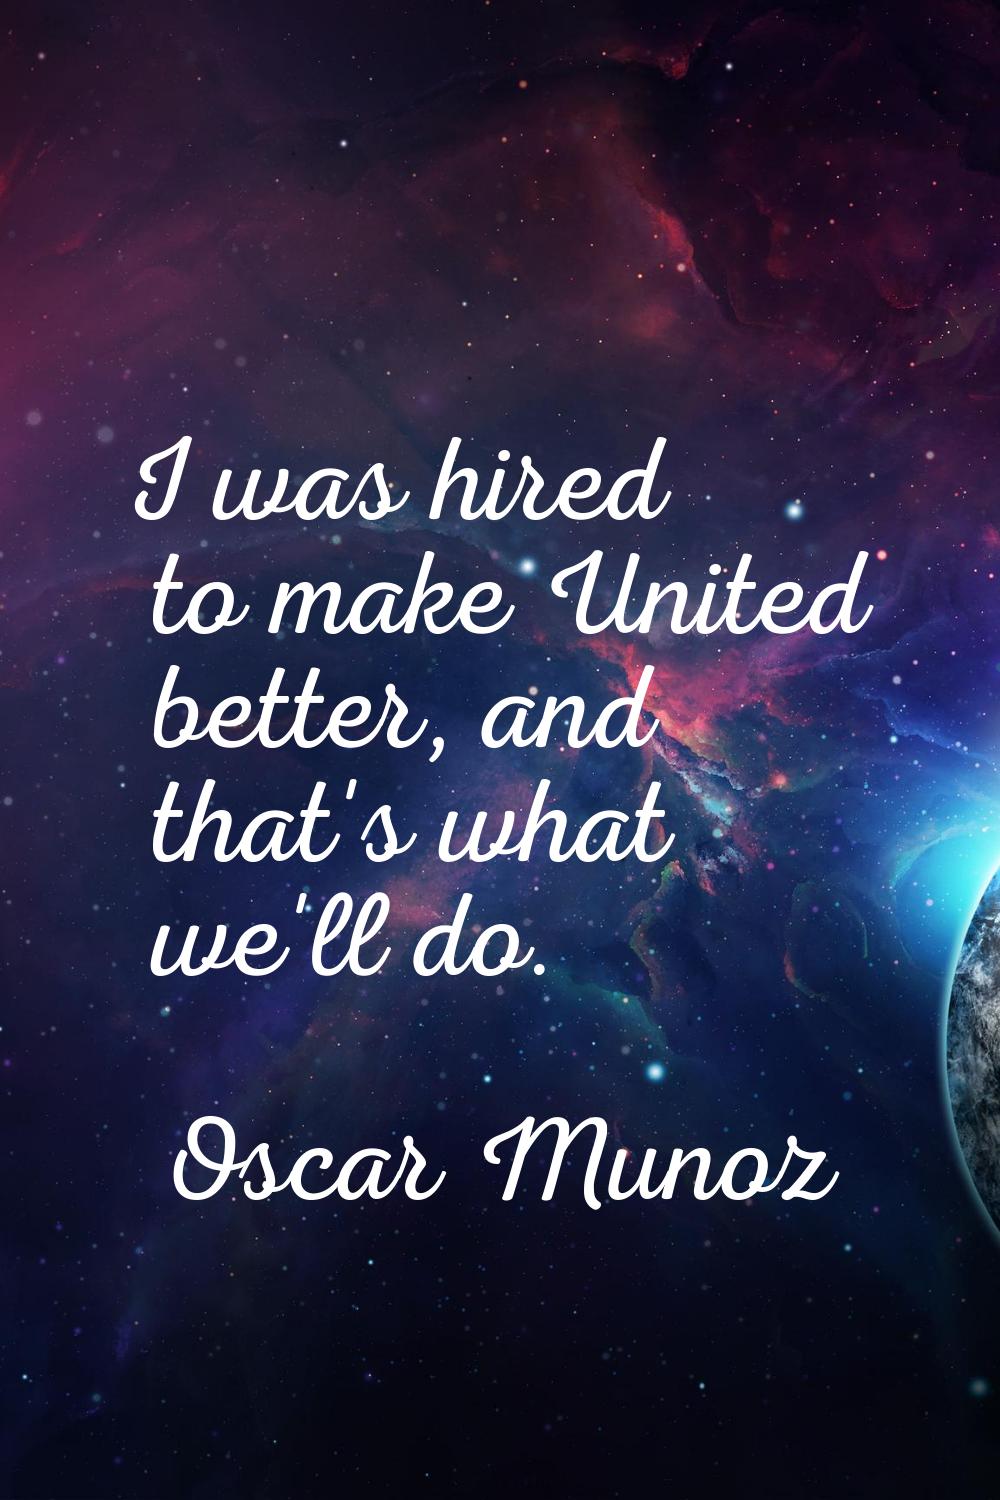 I was hired to make United better, and that's what we'll do.